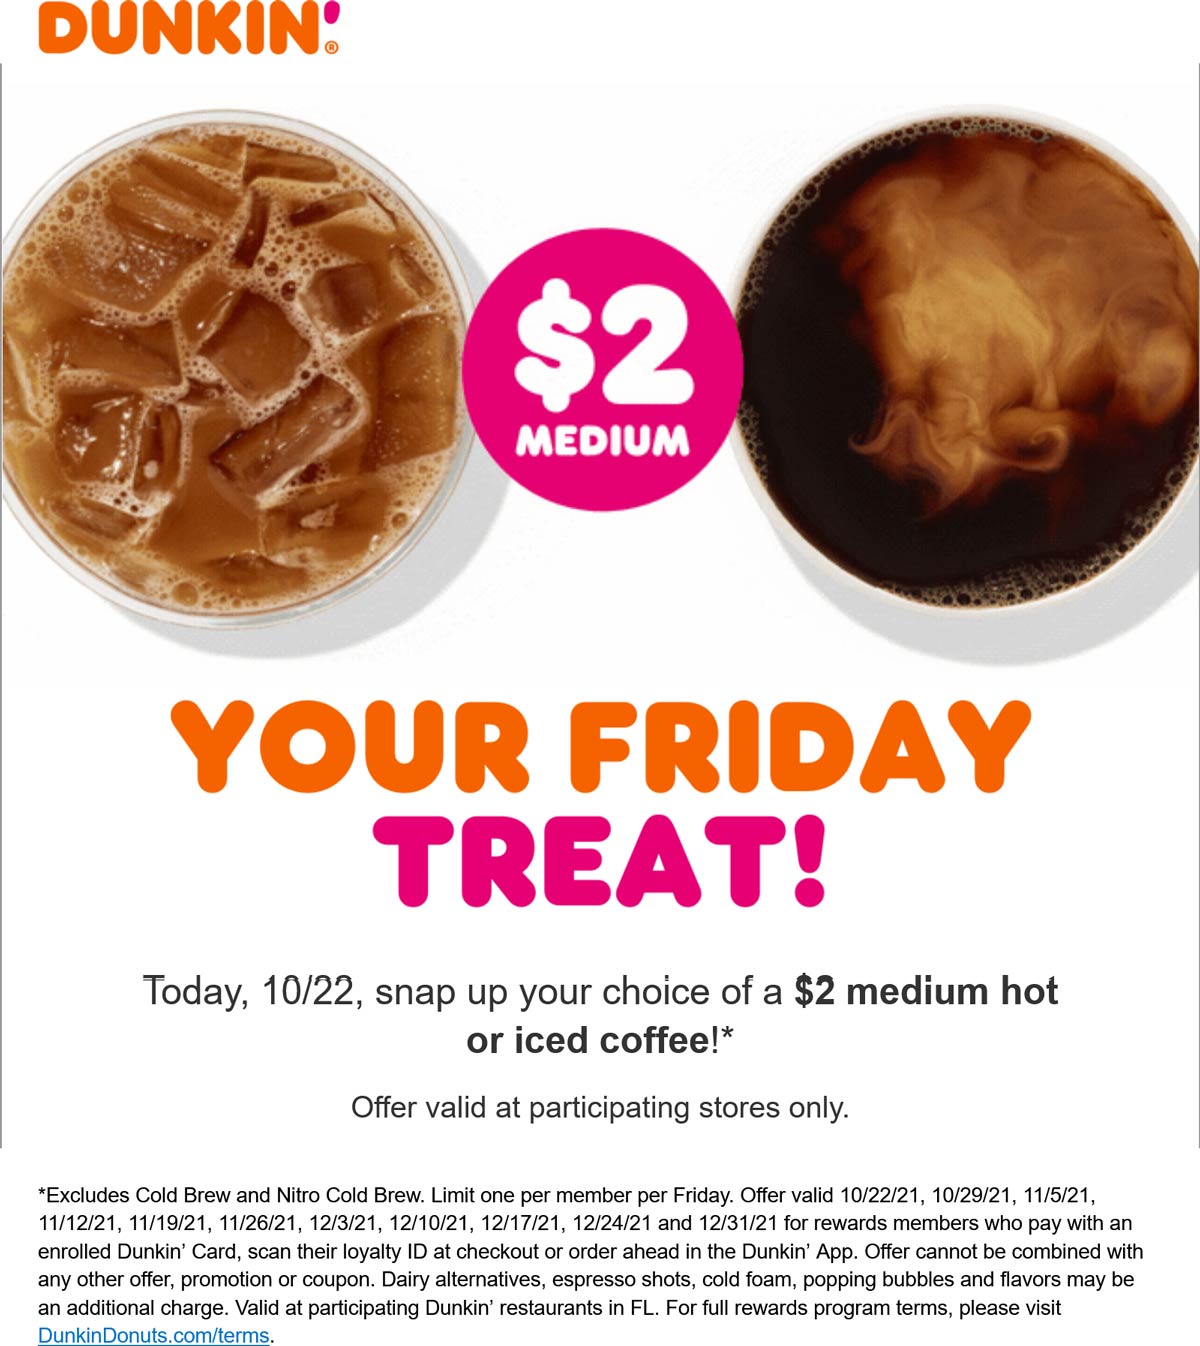 Dunkin restaurants Coupon  $2 hot or iced coffee today at Dunkin Donuts #dunkin 